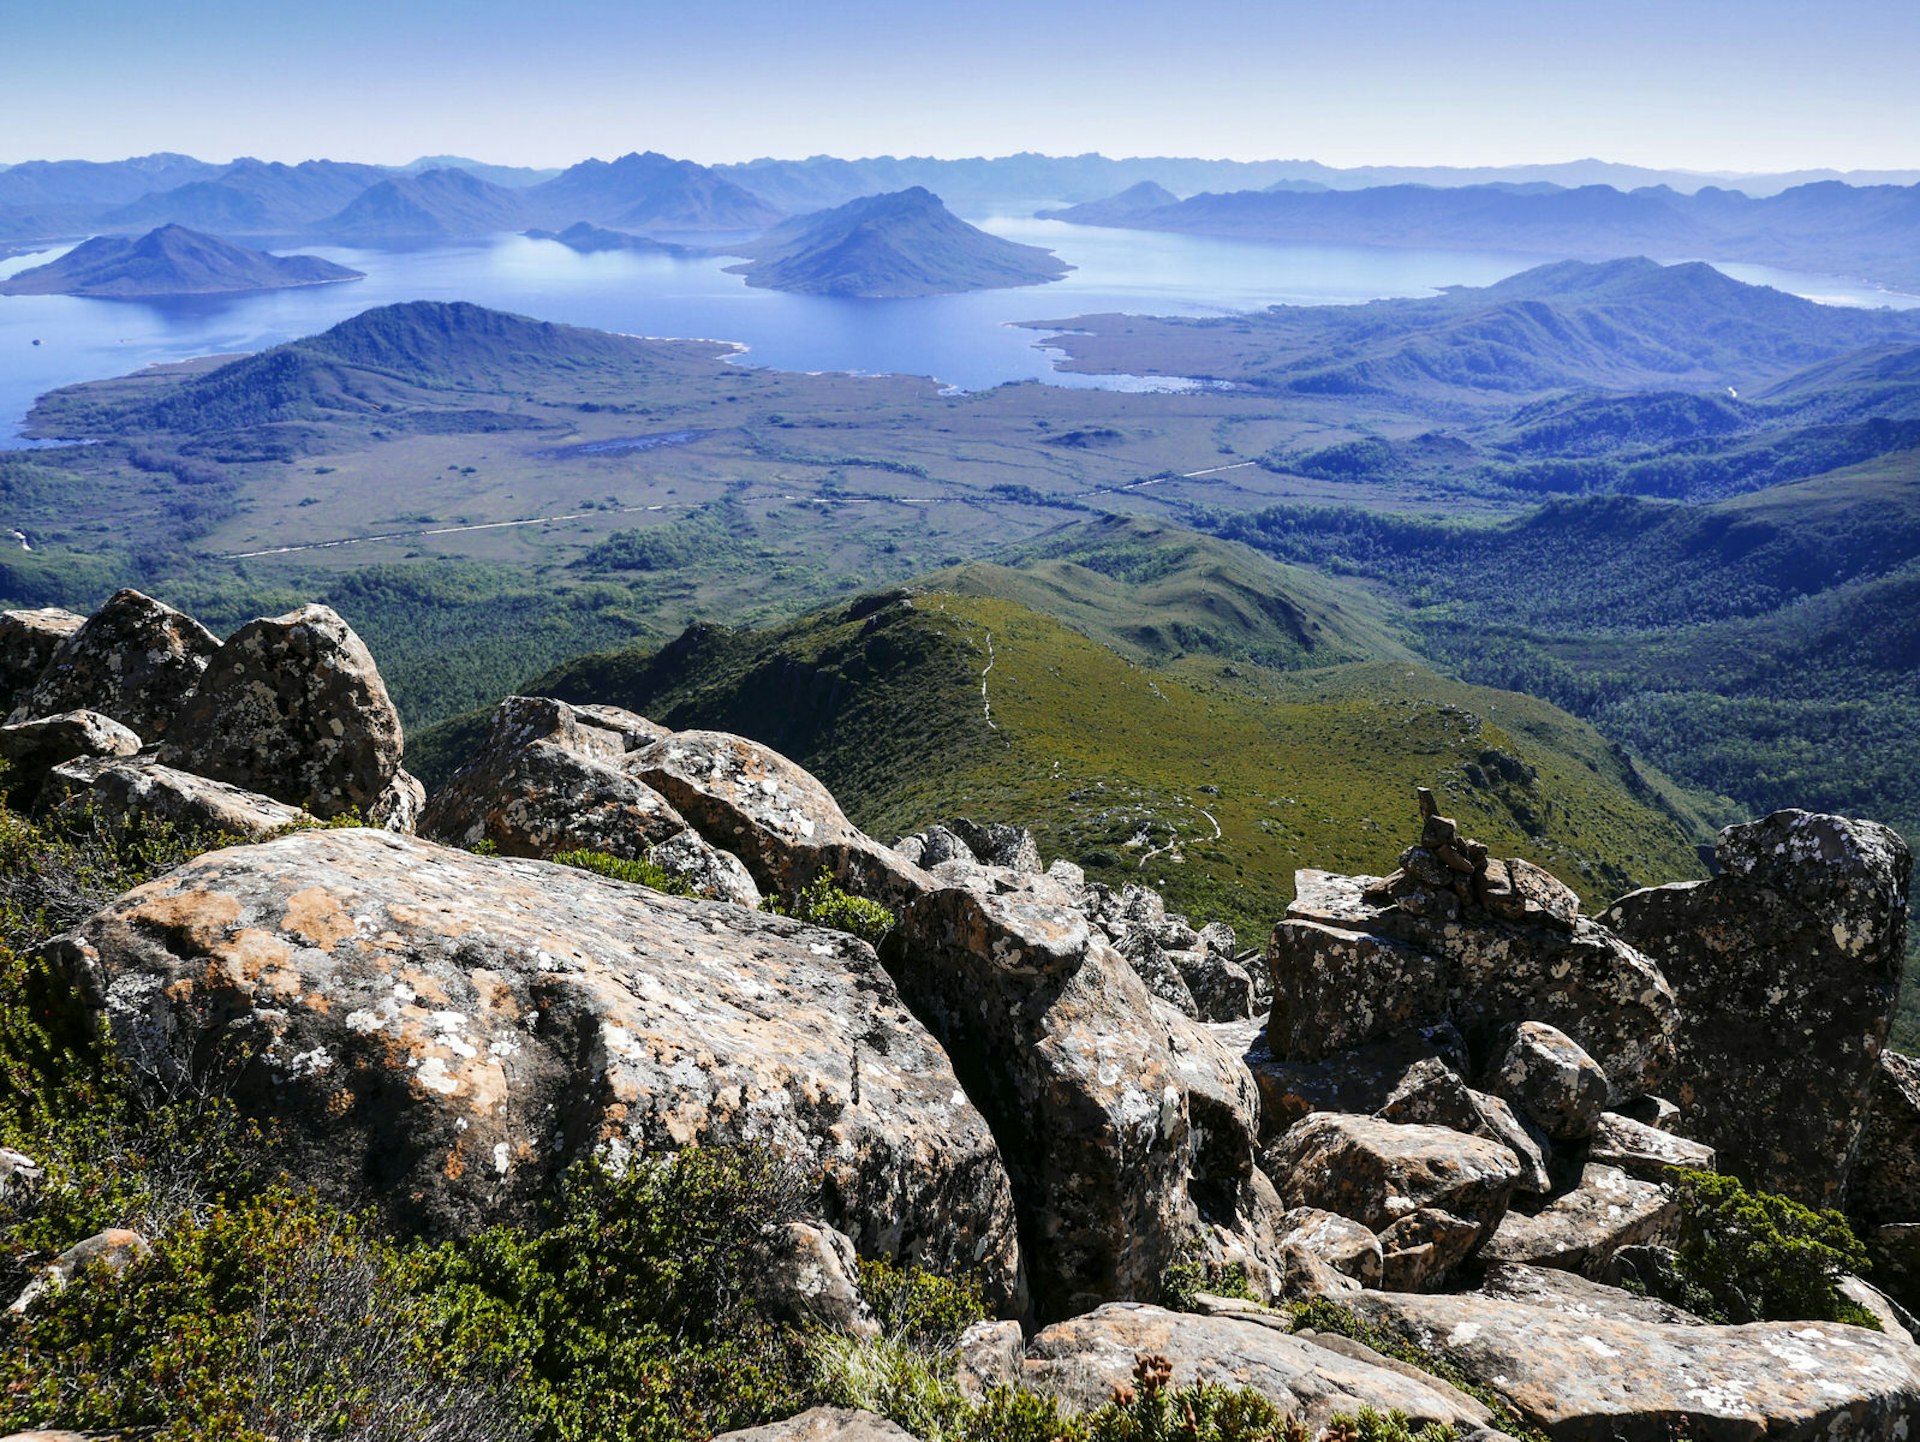 View of the surrounding countryside, including mountain peaks, boulders and a lake